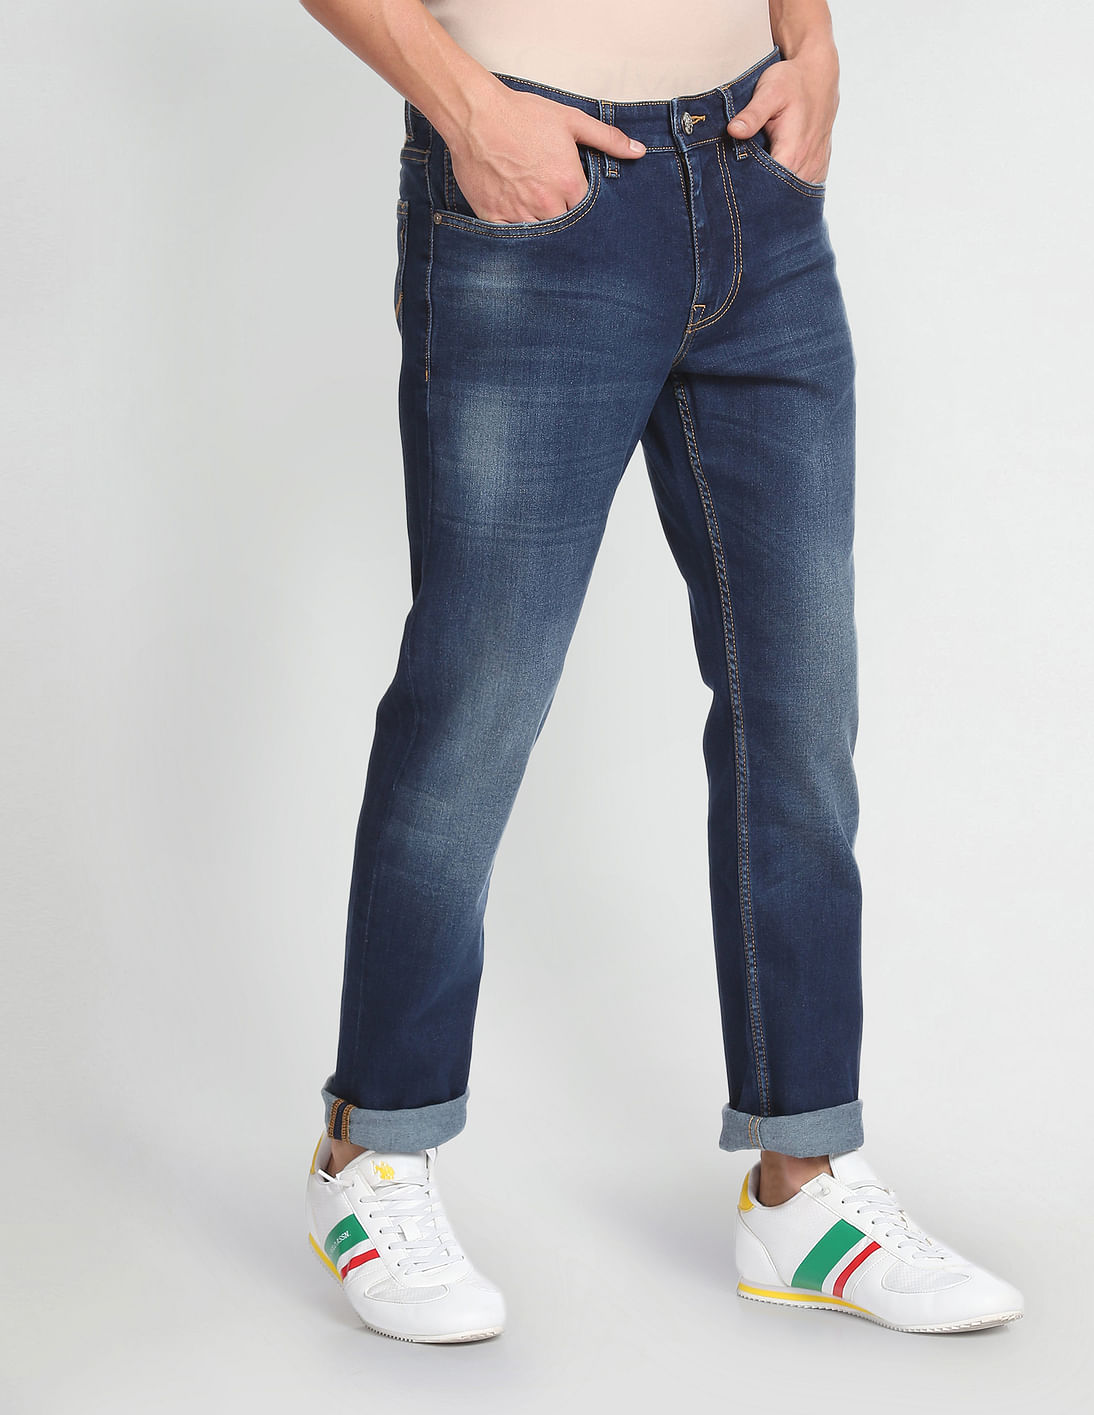 Buy U.S. Polo Assn. Denim Co. Slim Tapered Fit Blue Jeans - NNNOW.com